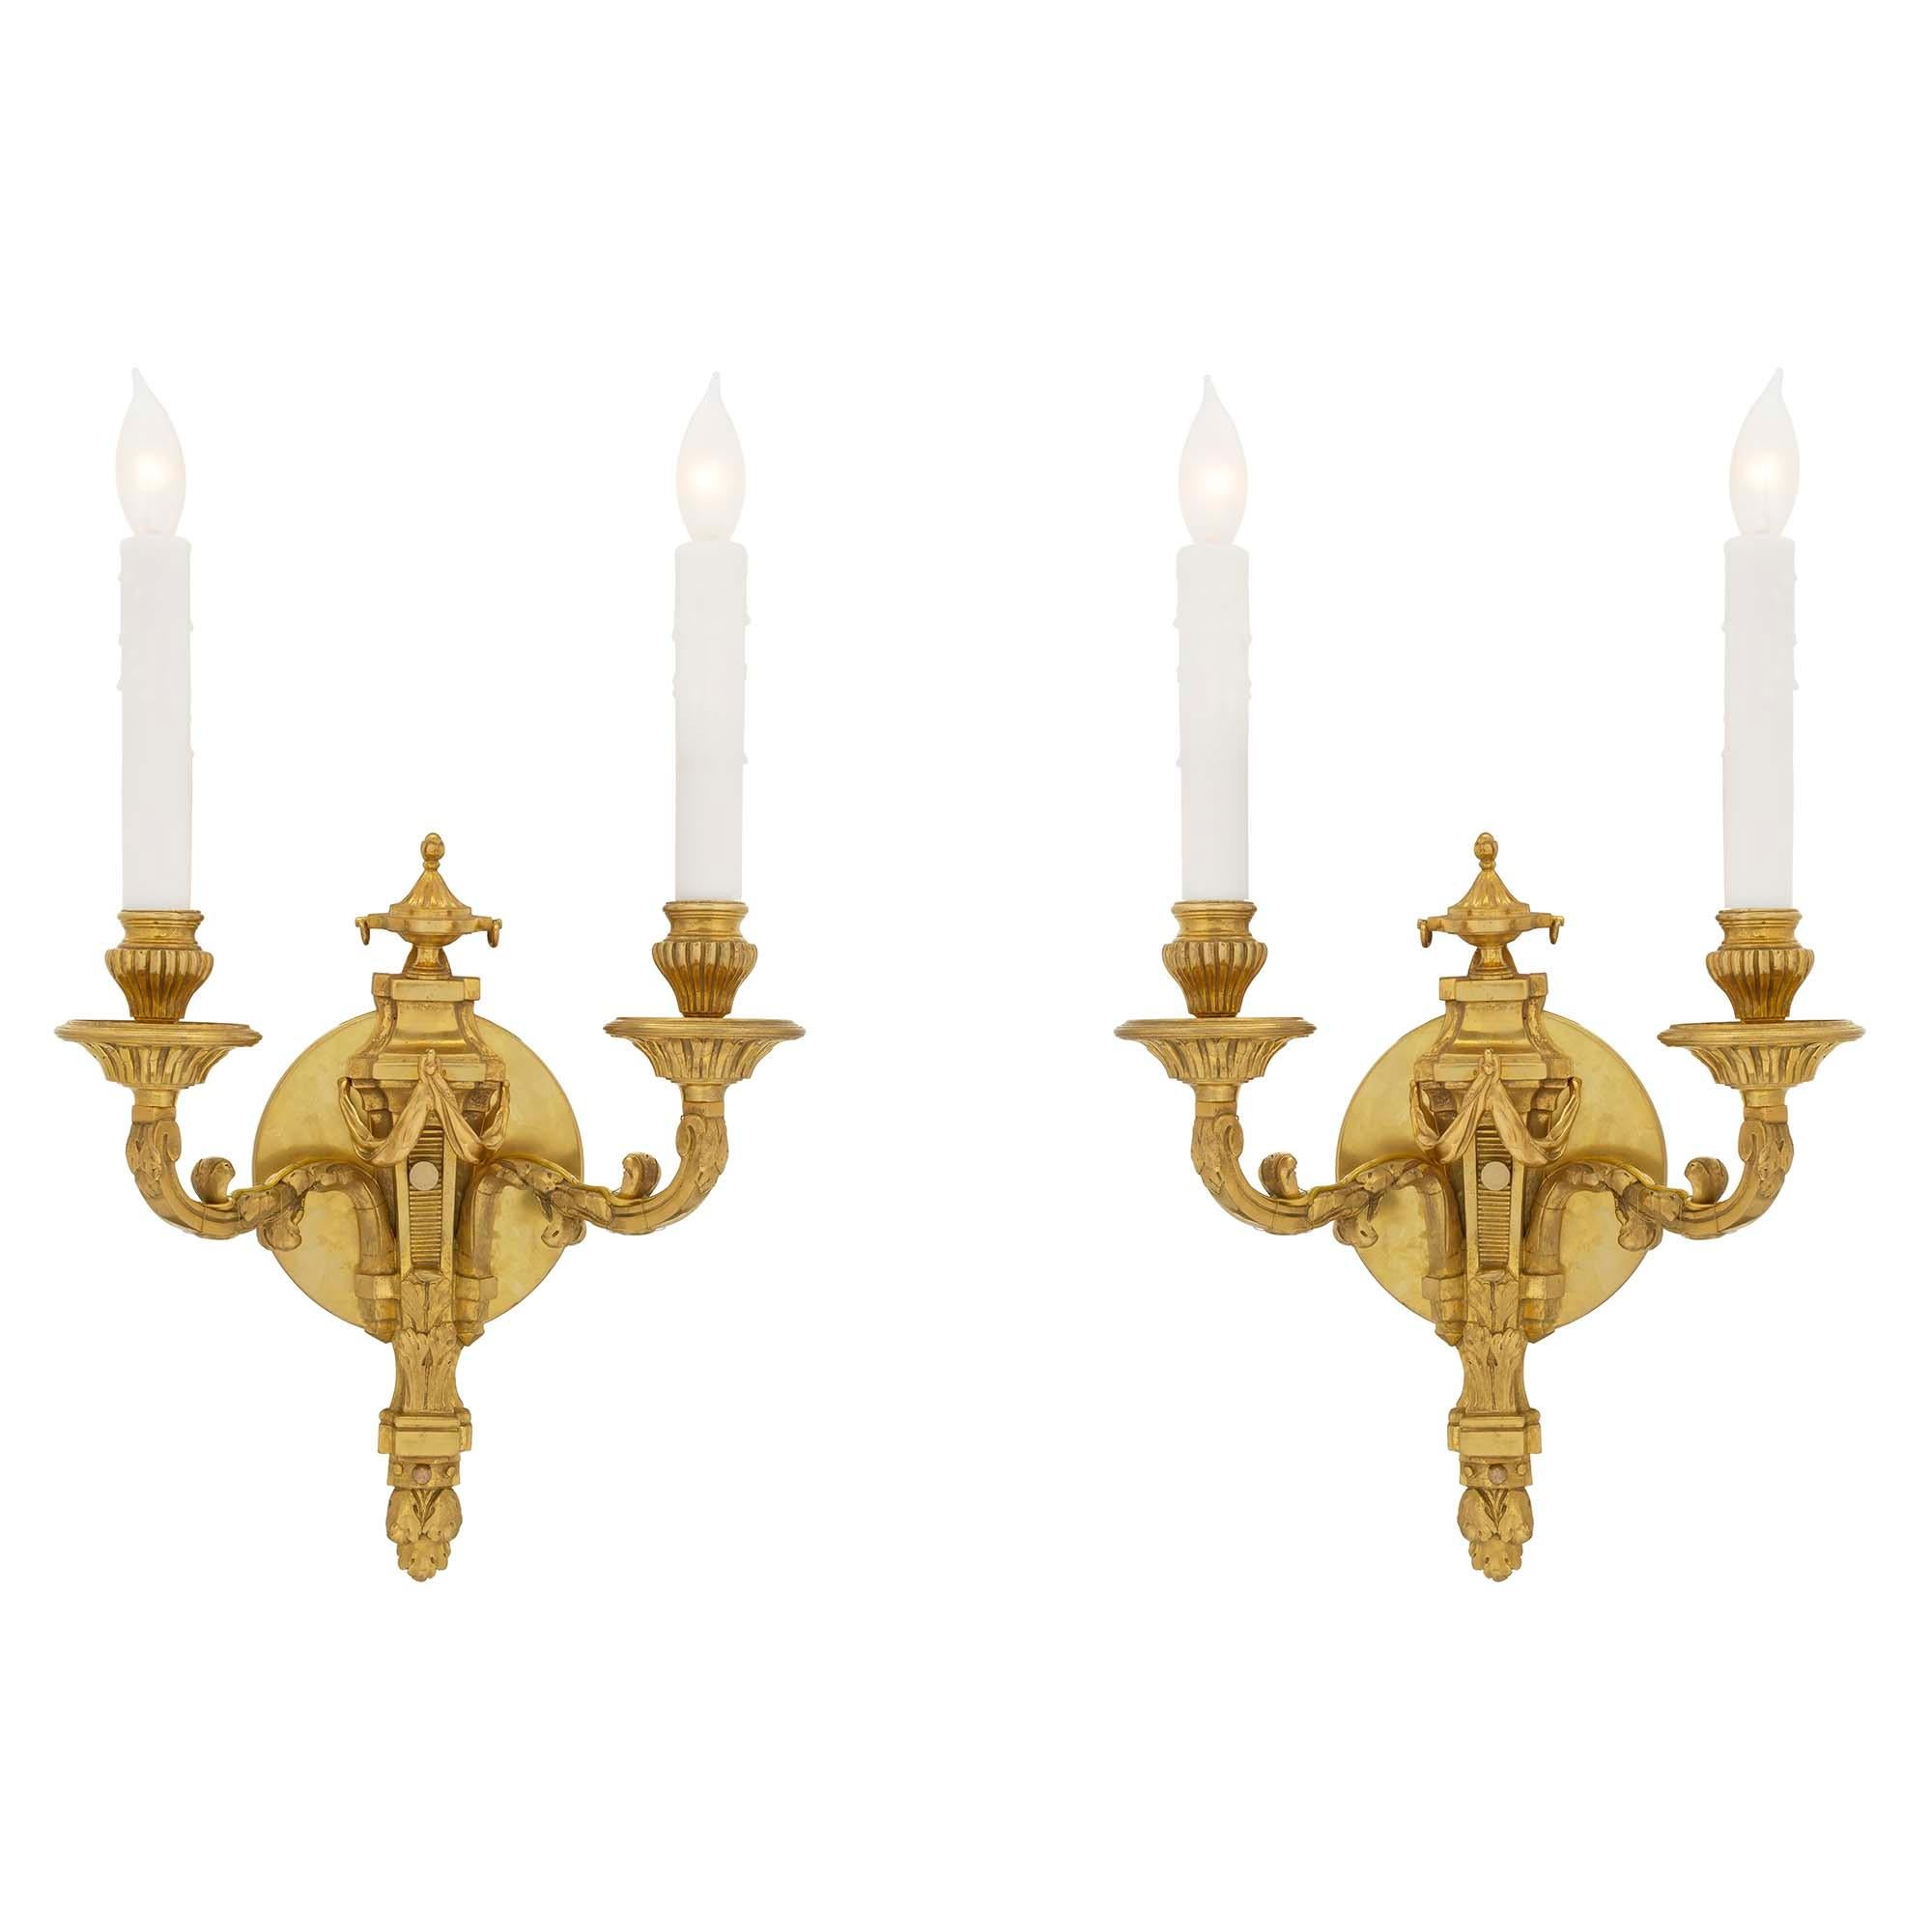 An elegant pair of French mid-19th century Louis XVI ormolu sconces. Each backplate has an urn of prosperity above a draped ribbon. Below is a recessed reeded design above a double acanthus leave with a bottom final. The two electrified ‘S’ scrolled